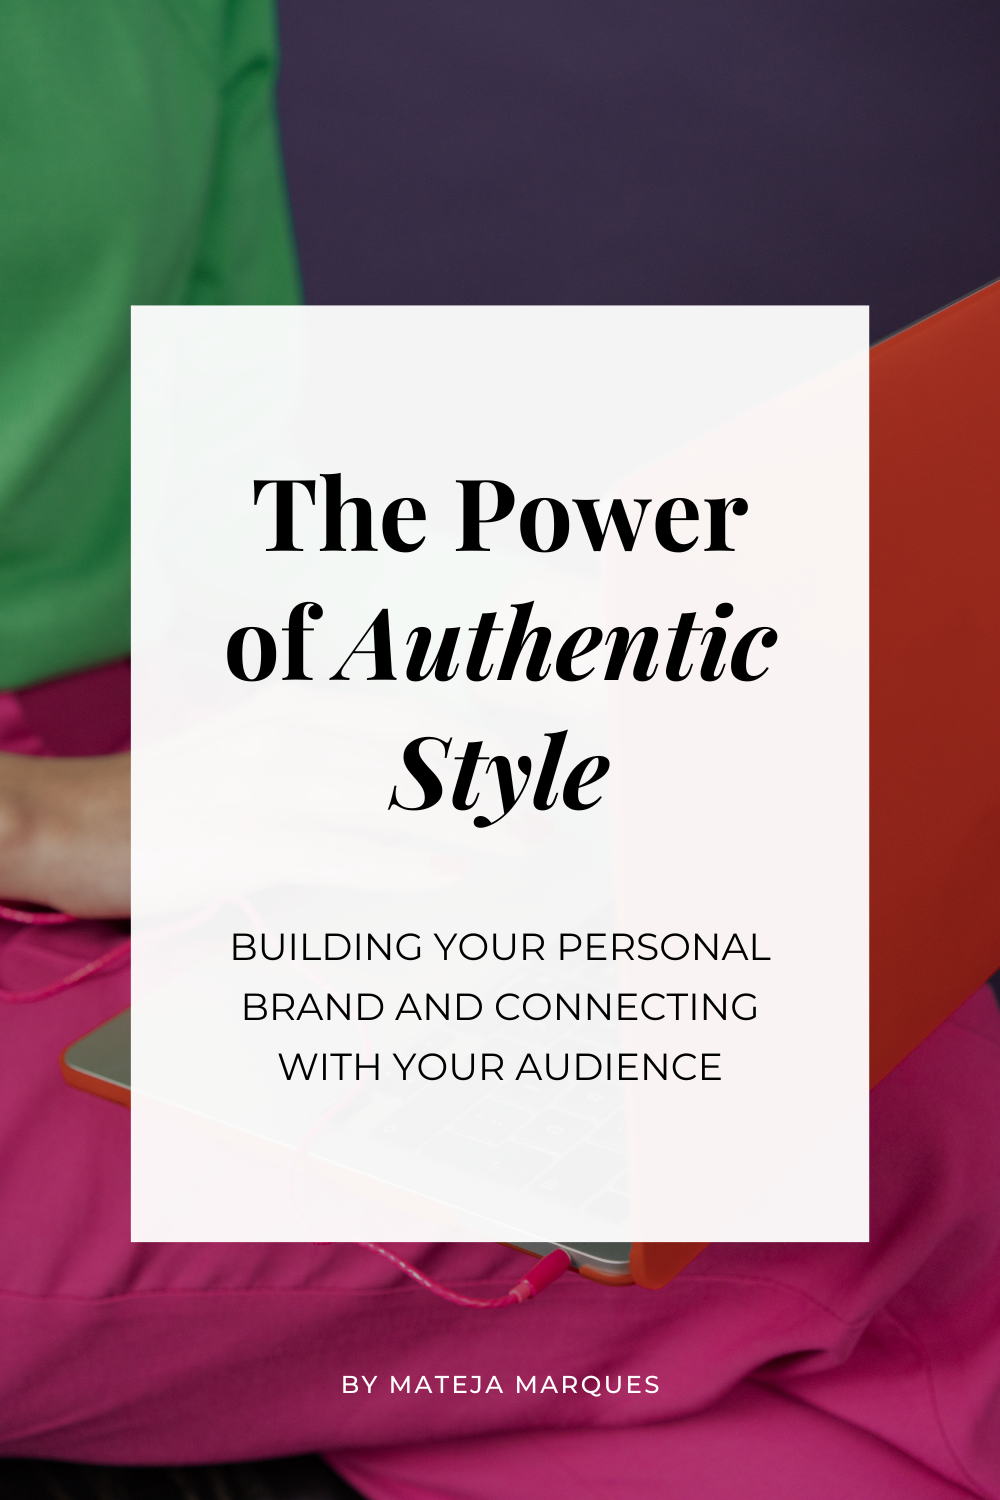 The Power of Authentic Style: Building Your Personal Brand and Connecting with Your Audience